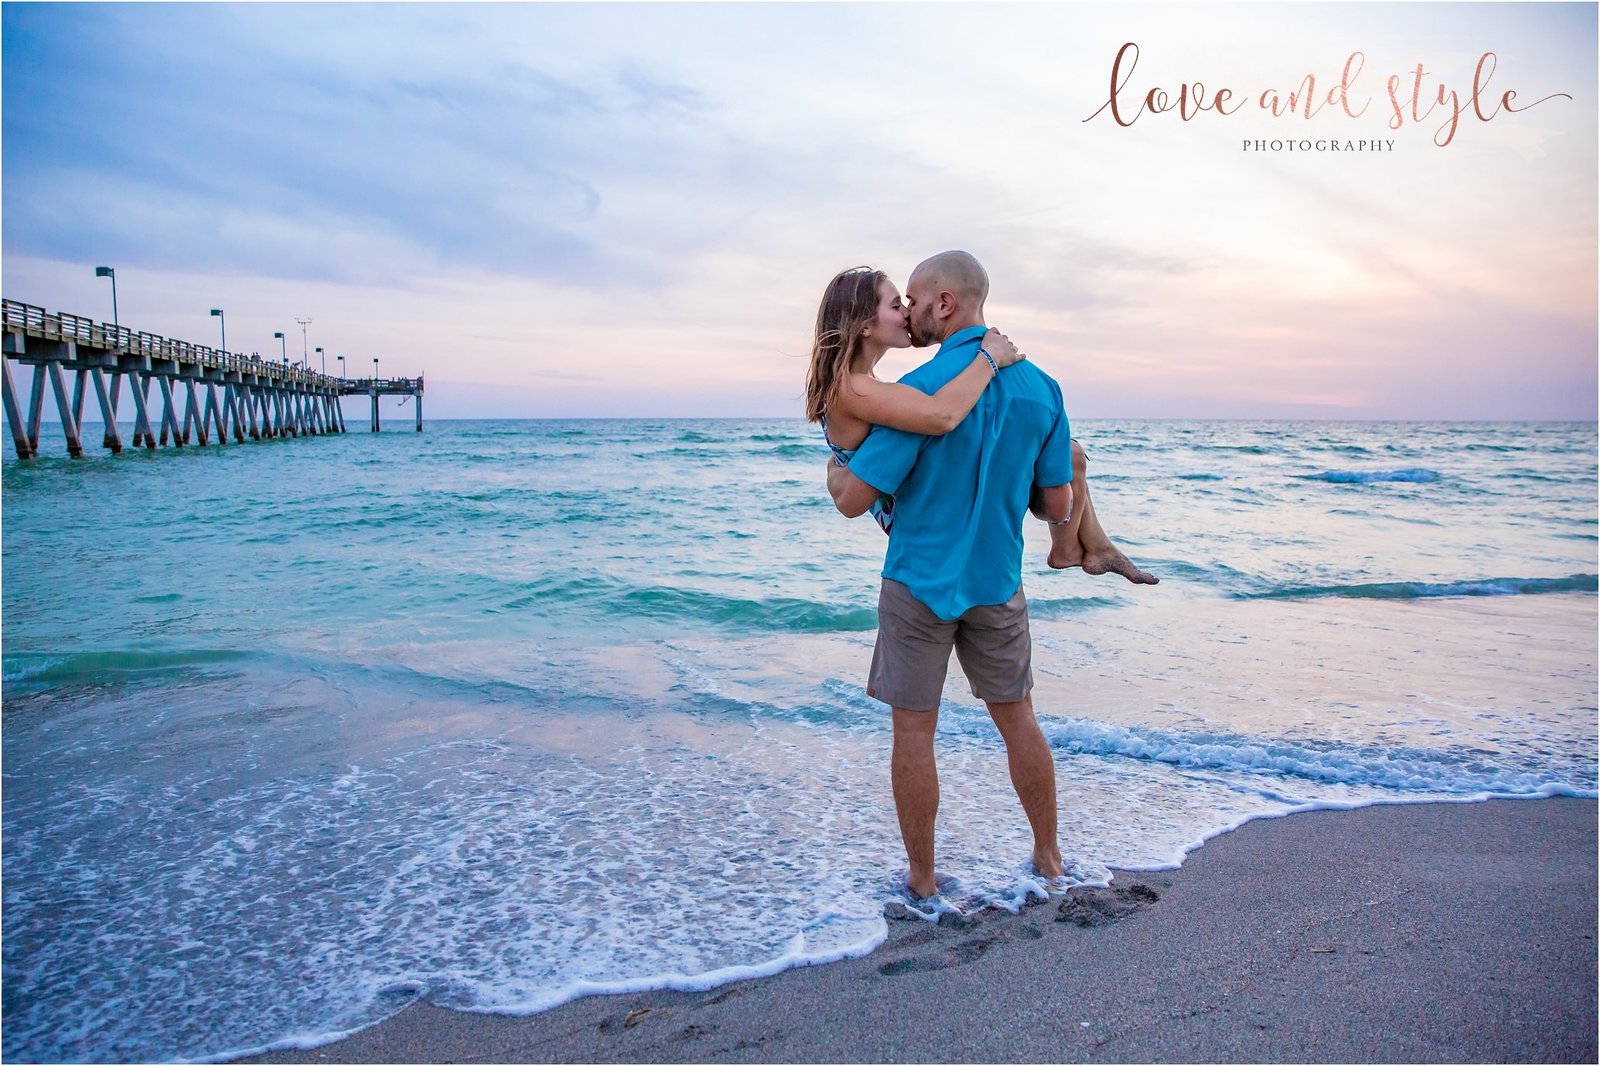 Engagement Photography at the Venice Dog Beach during sunset by the pier